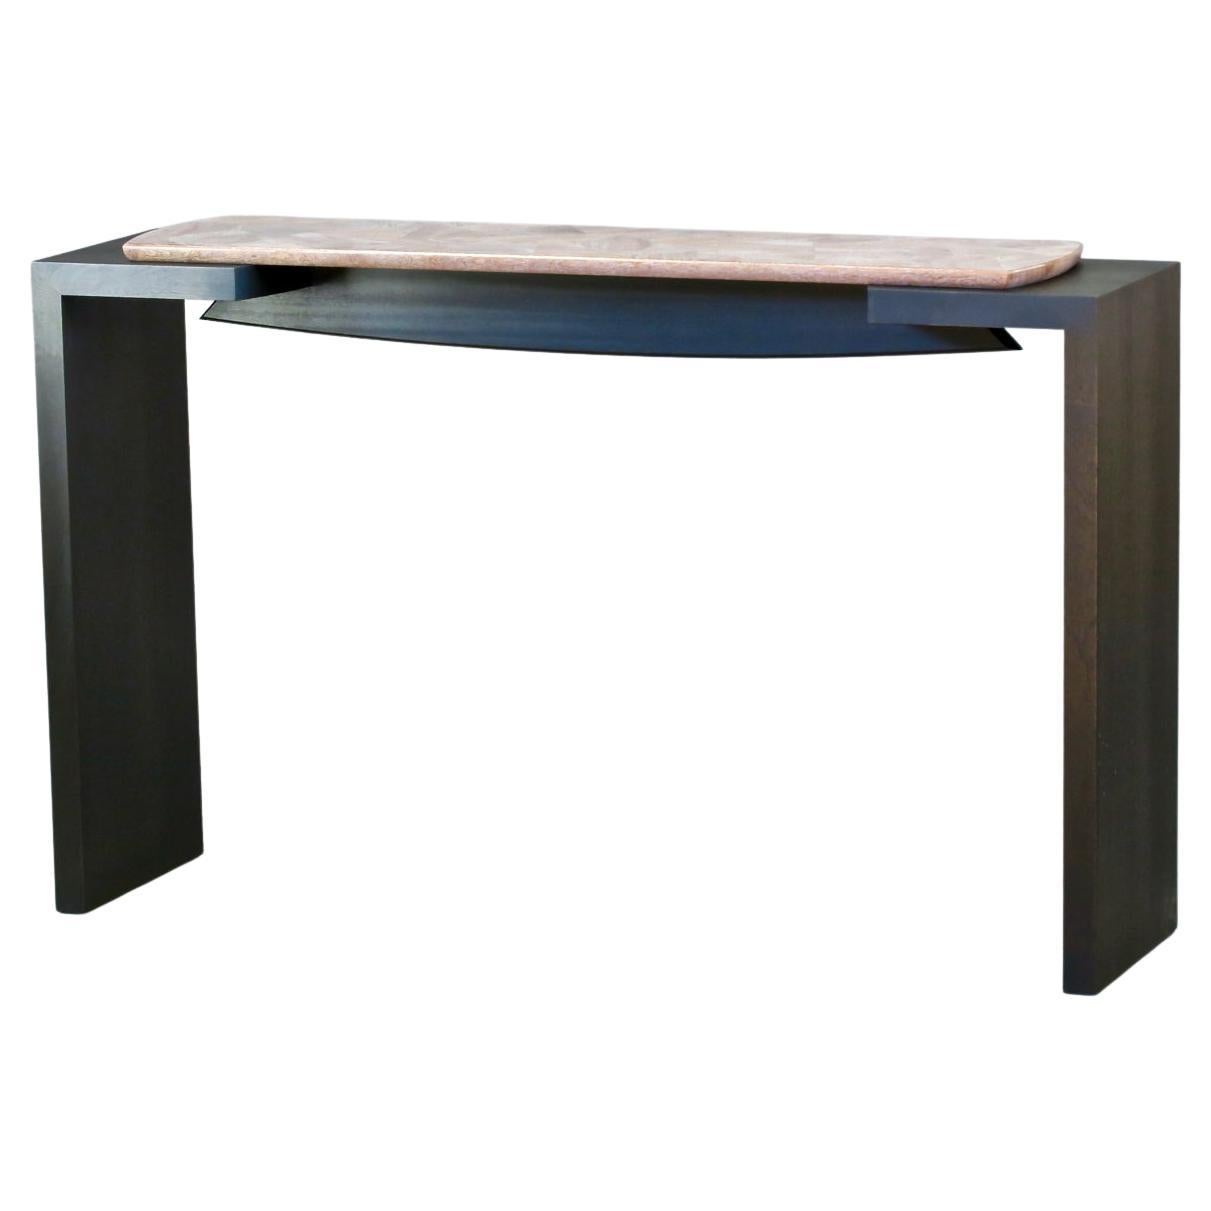 Cracked Ice Mahogany Console Table by Thomas Throop/ Black Creek Design-In Stock